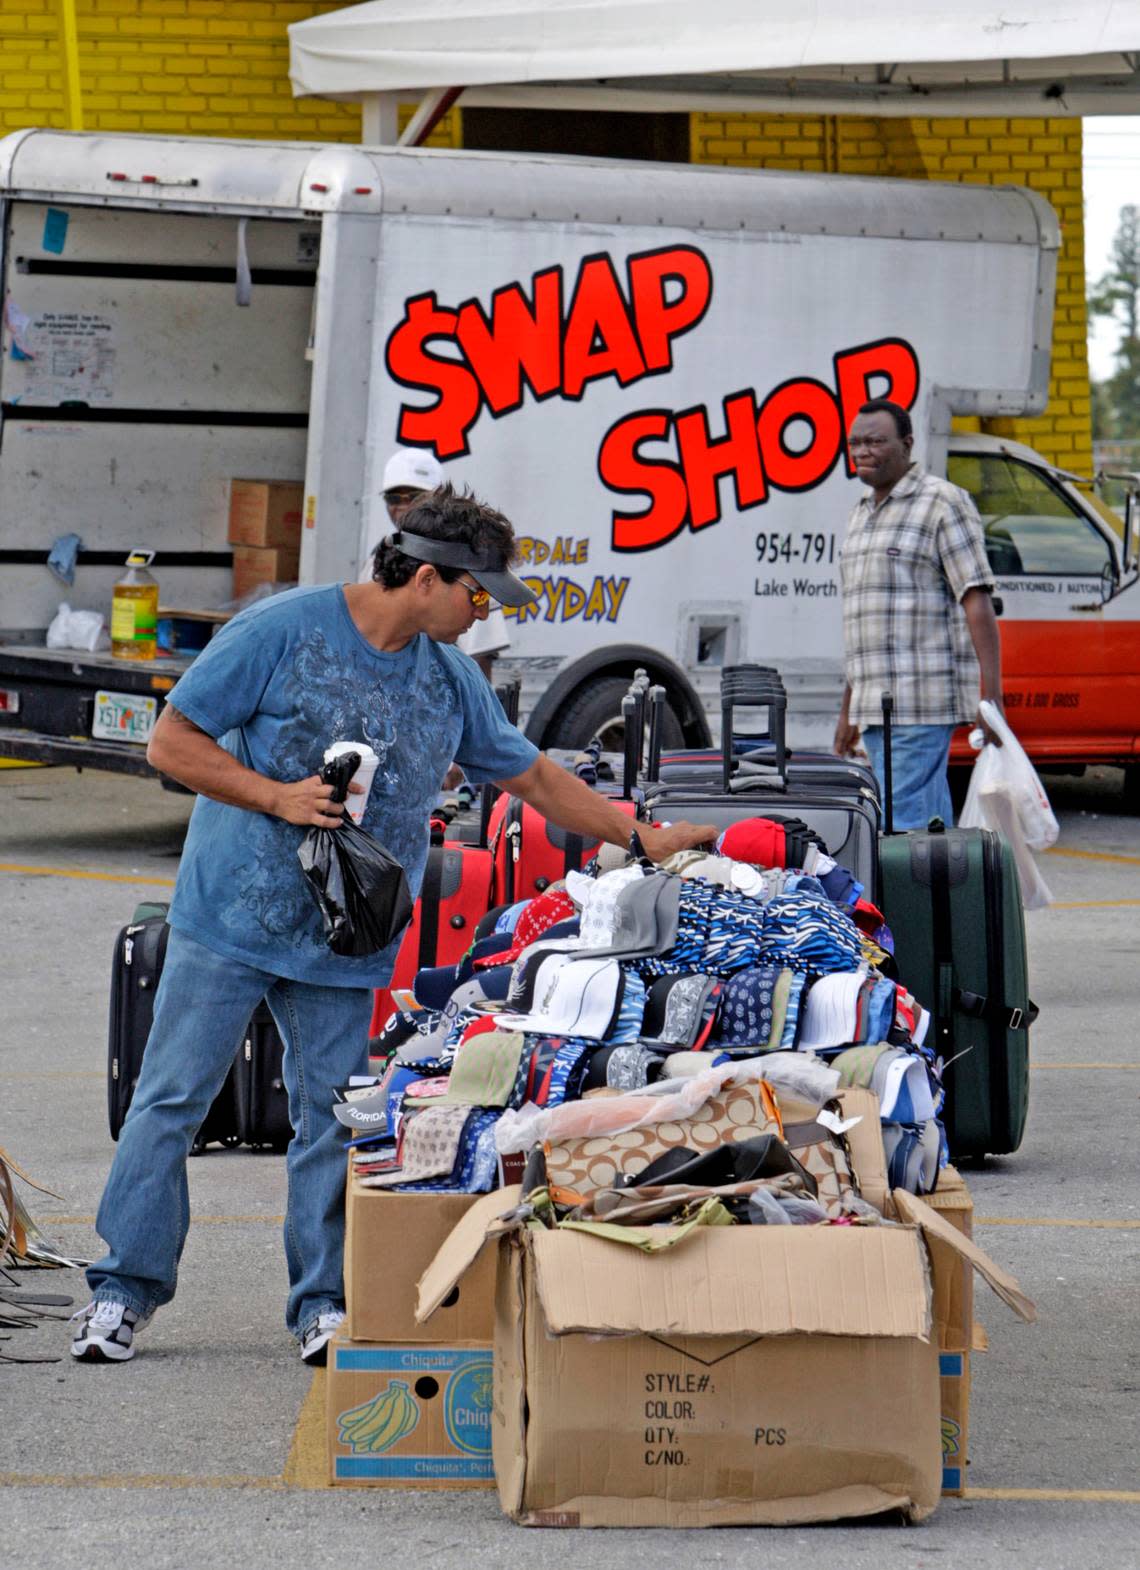 The Swap Shop near Fort Lauderdale is open on Christmas Day.